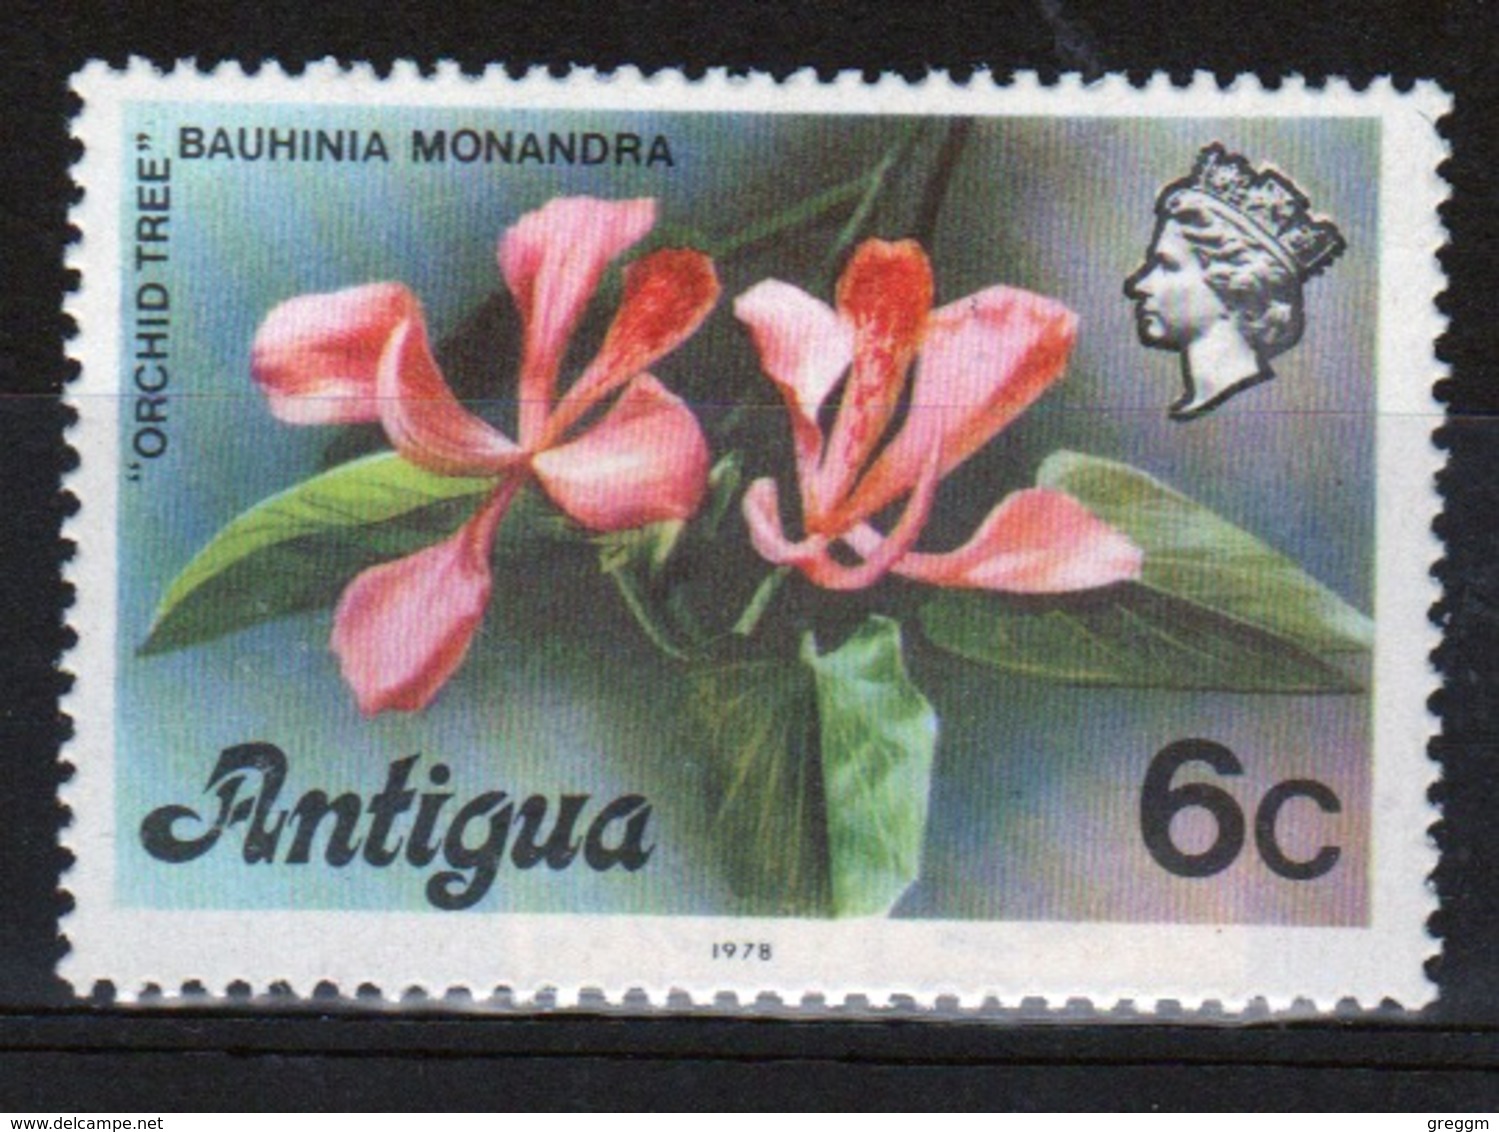 Antigua 1976 Single 6c Stamp From The Definitive Set. - 1960-1981 Ministerial Government